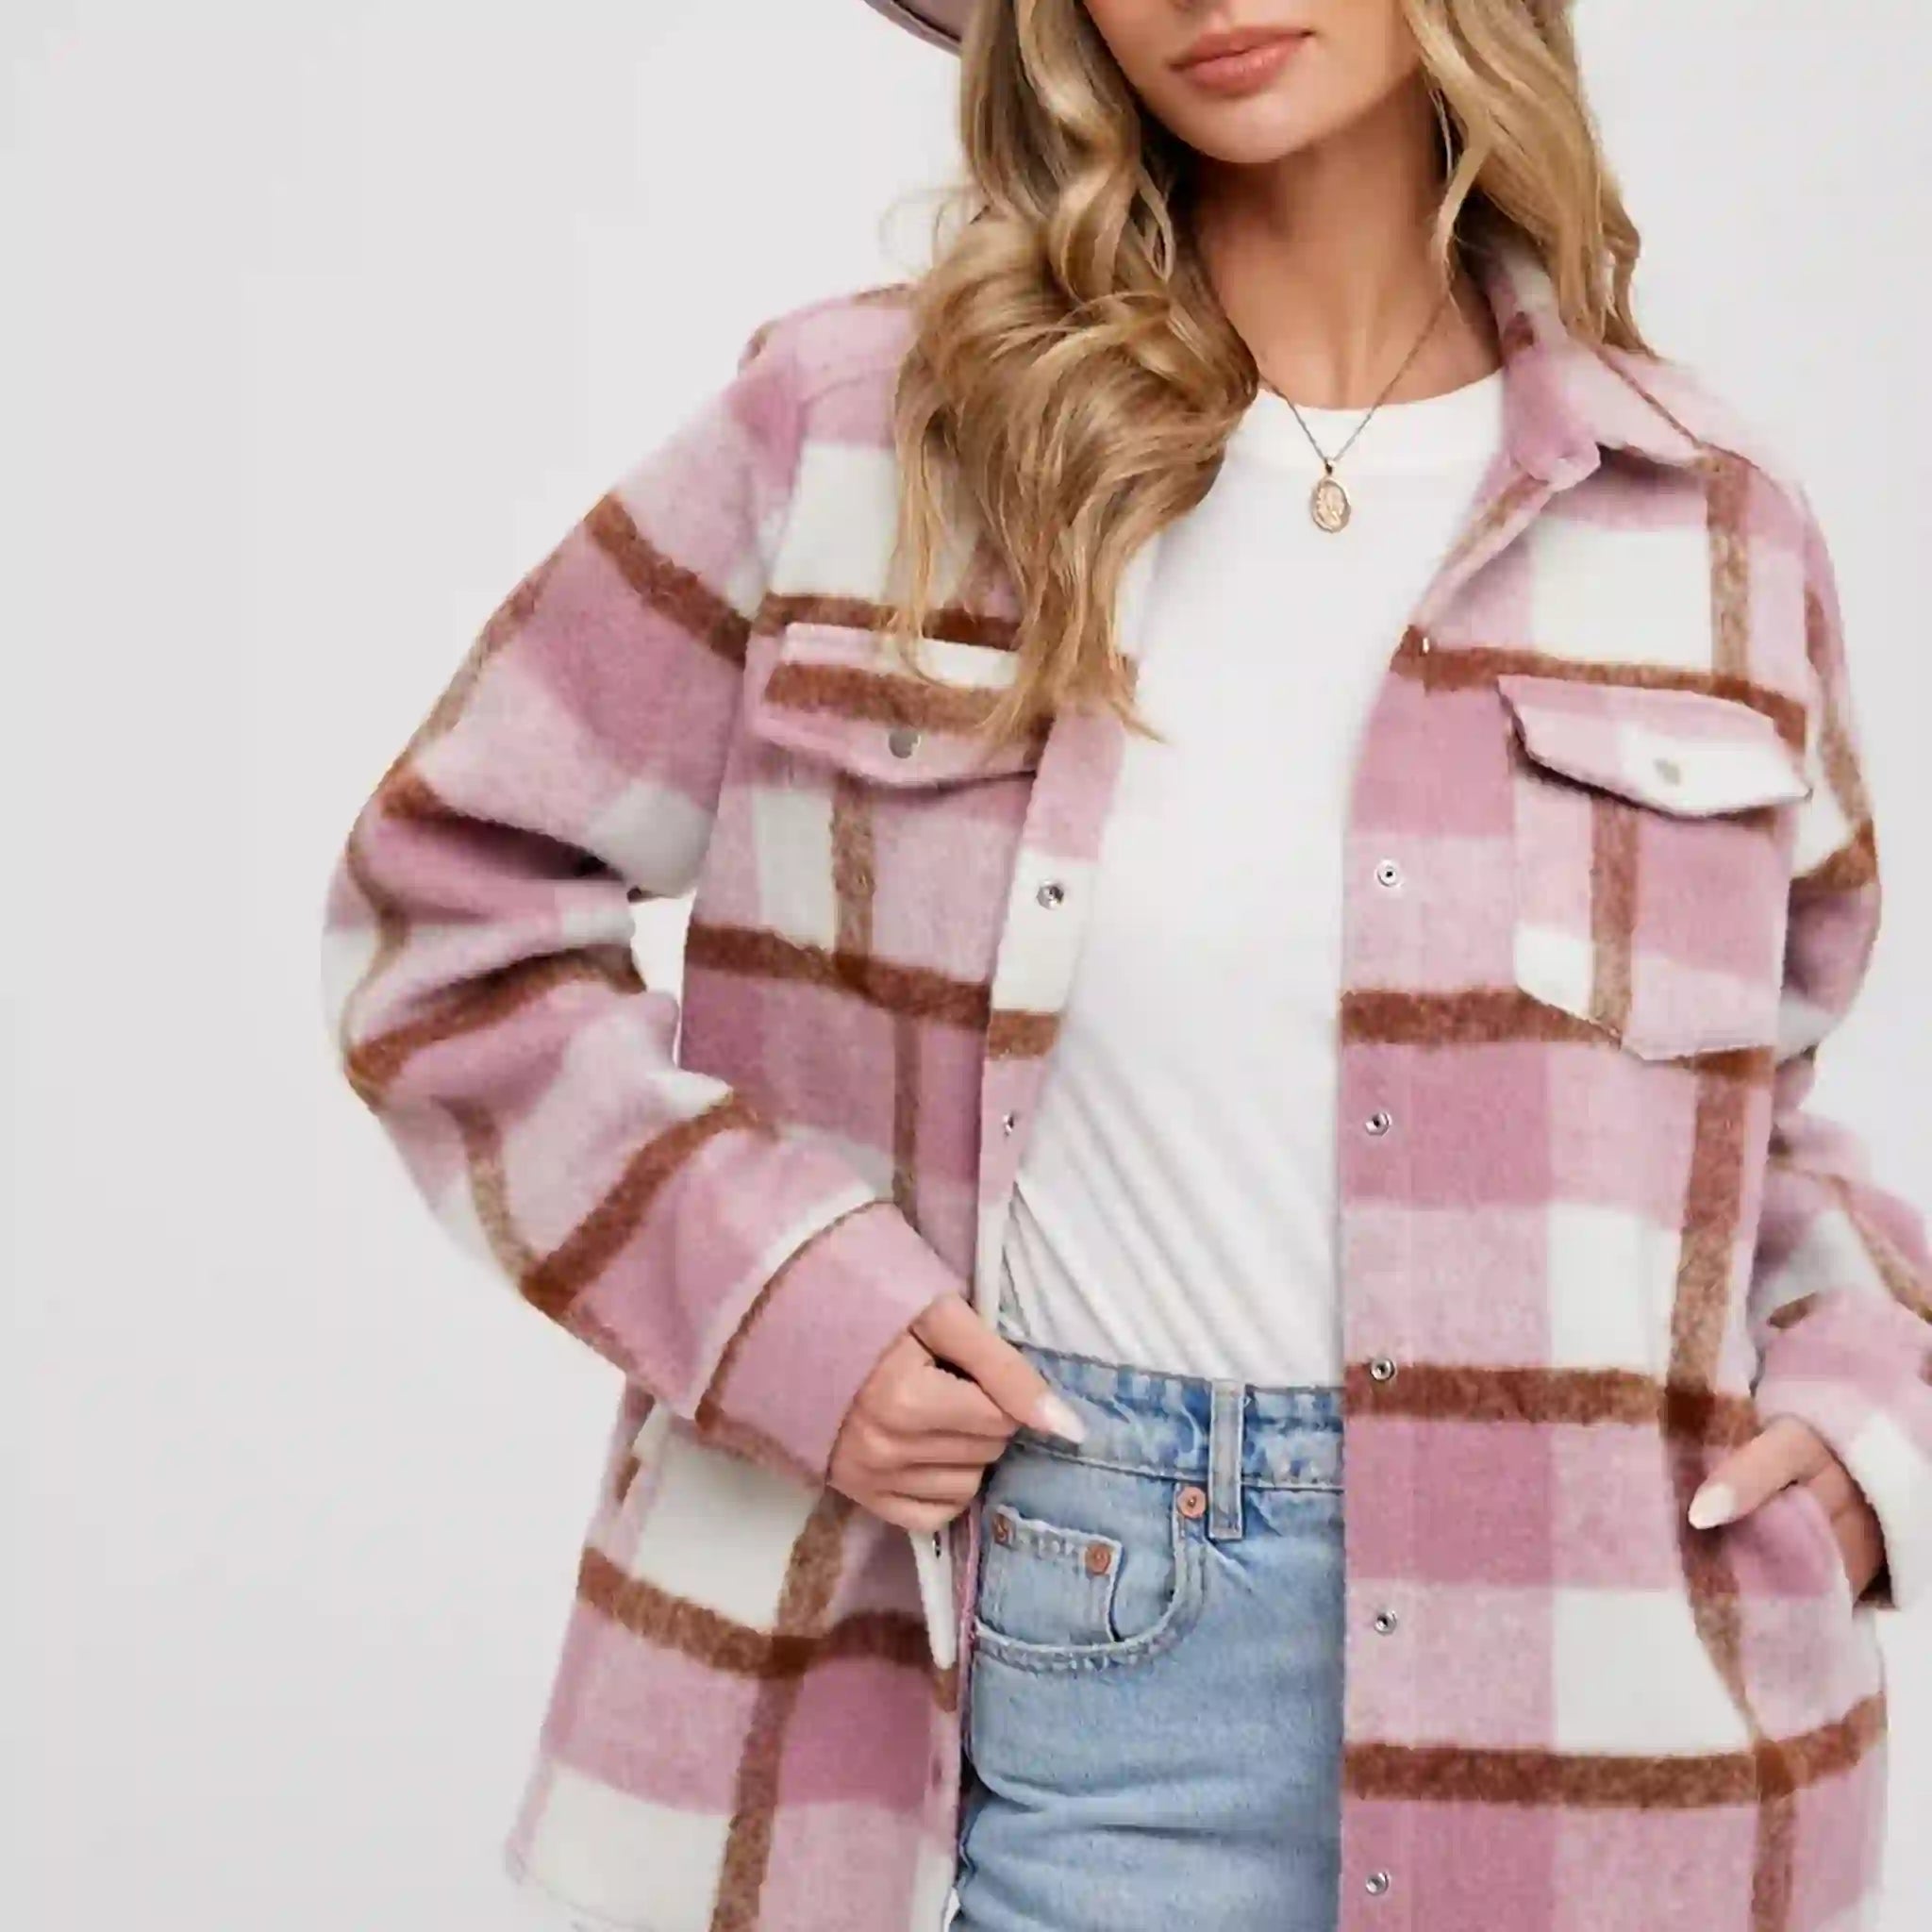 On a white background is a pink and white plaid shacked with front pockets.